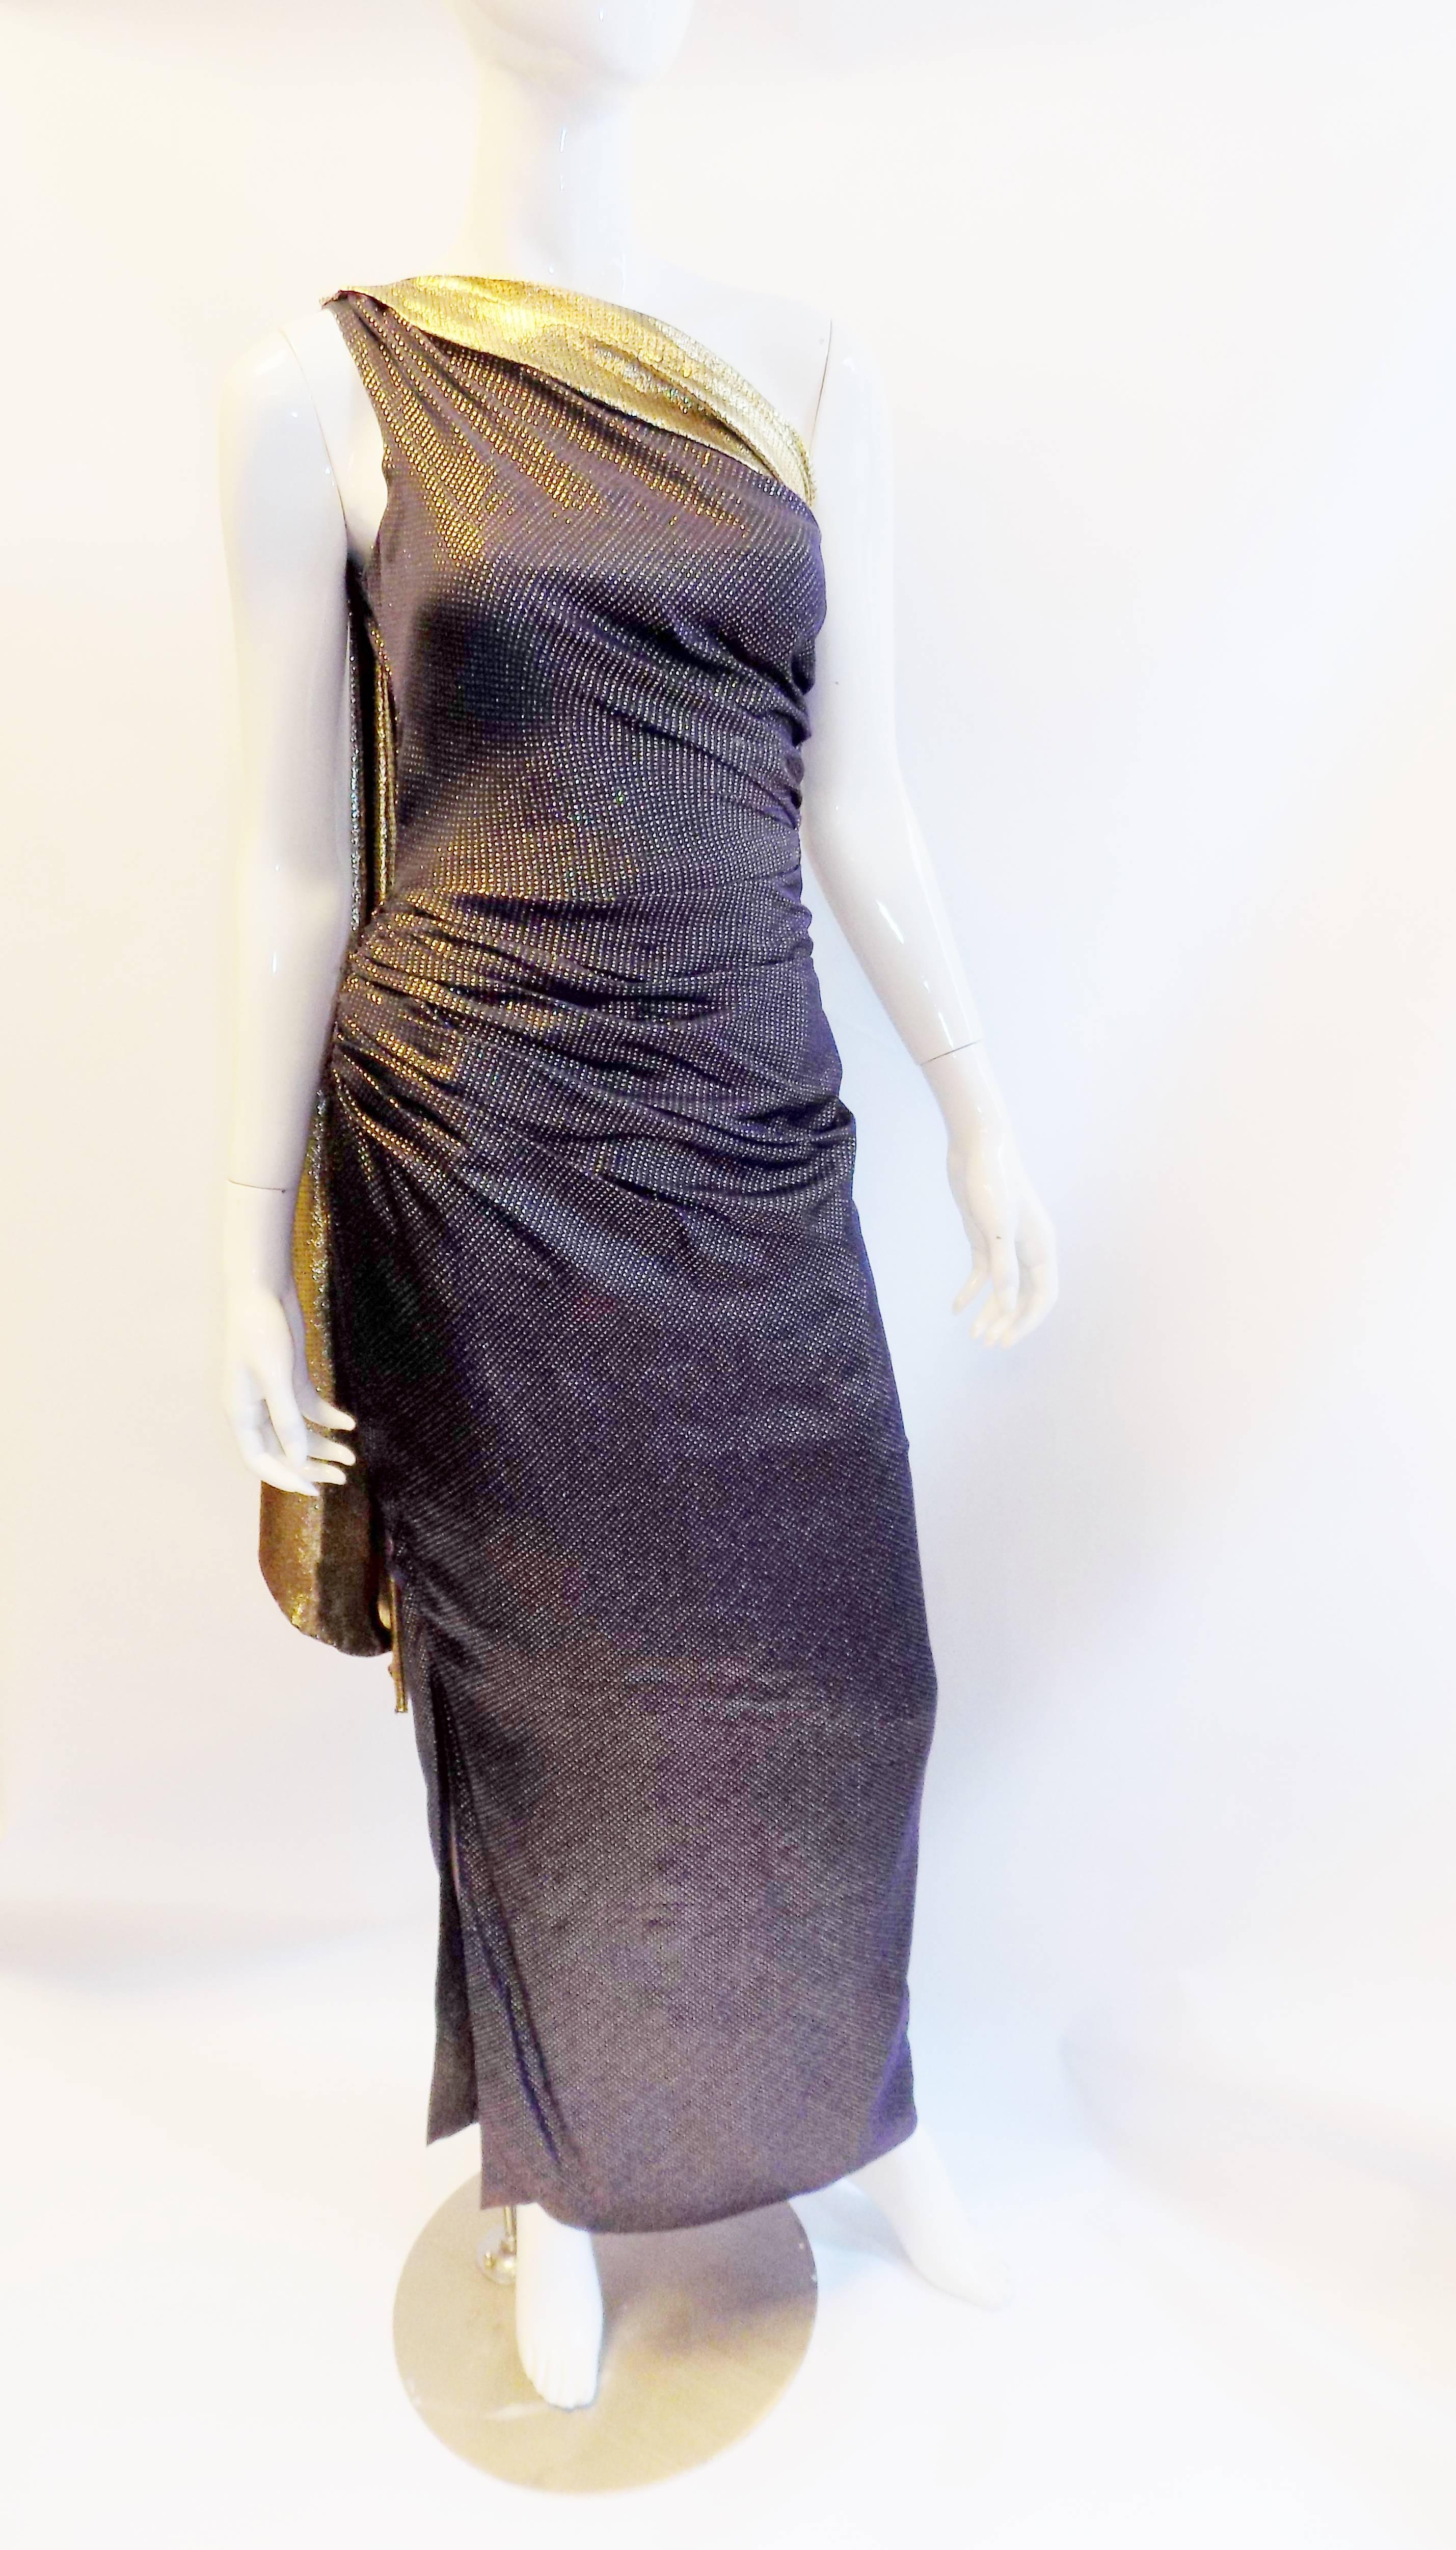 Spectacular Vicky Tiel Vintage Draped Goddess Lame dress . Gold and dark blue colors. Pristine condition. Size 3